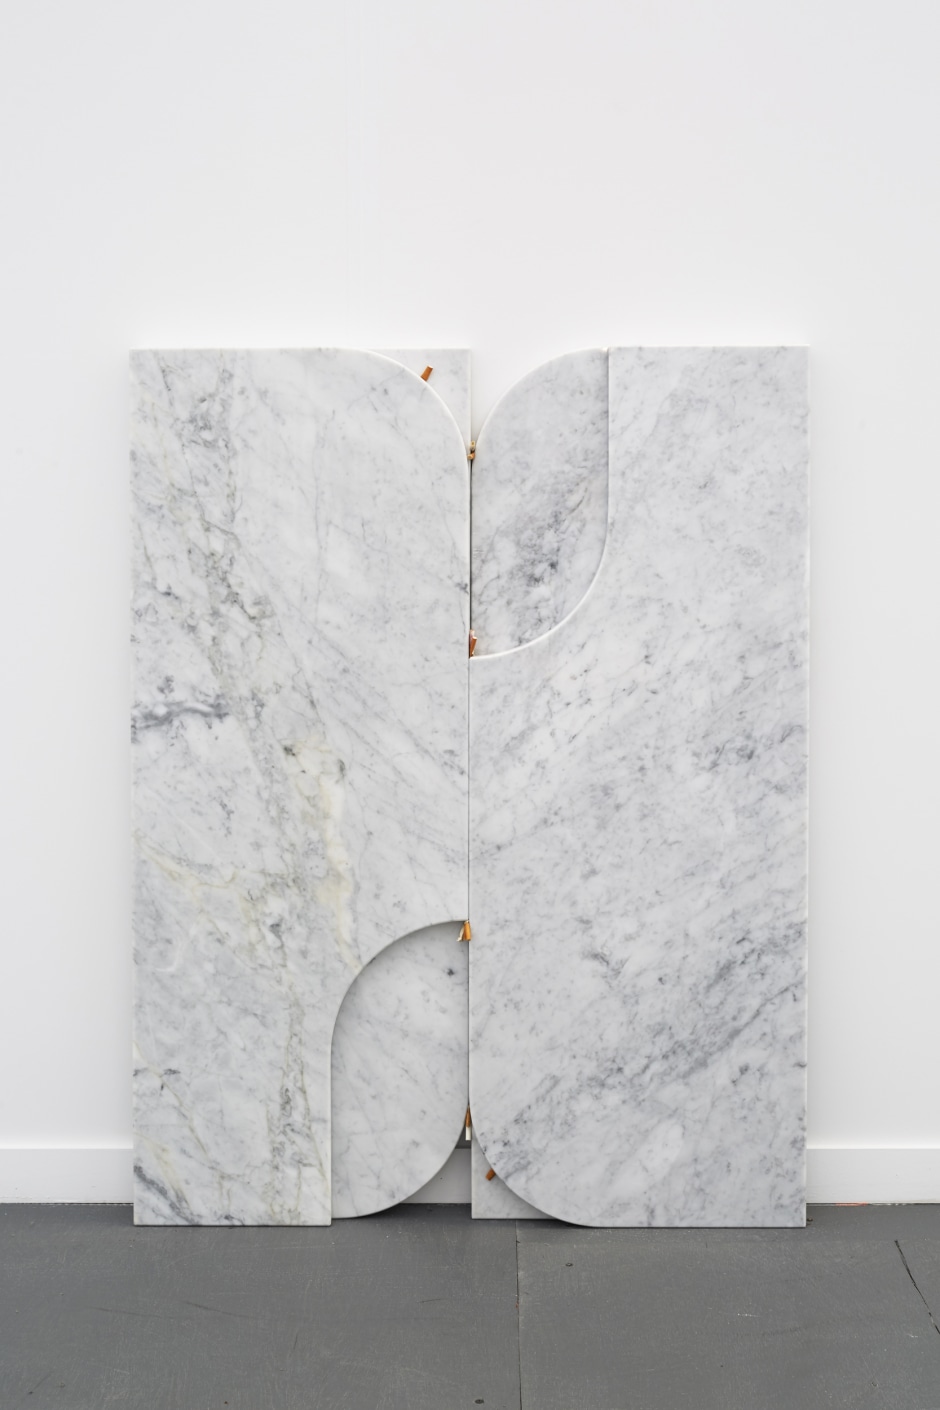 1 2 3 3 2 1, 2015  four marble slabs, nine cigarette butts  134.9 x 89.8 x 5.9 cm 53 1/8 x 35 3/8 x 2 5/16 in.